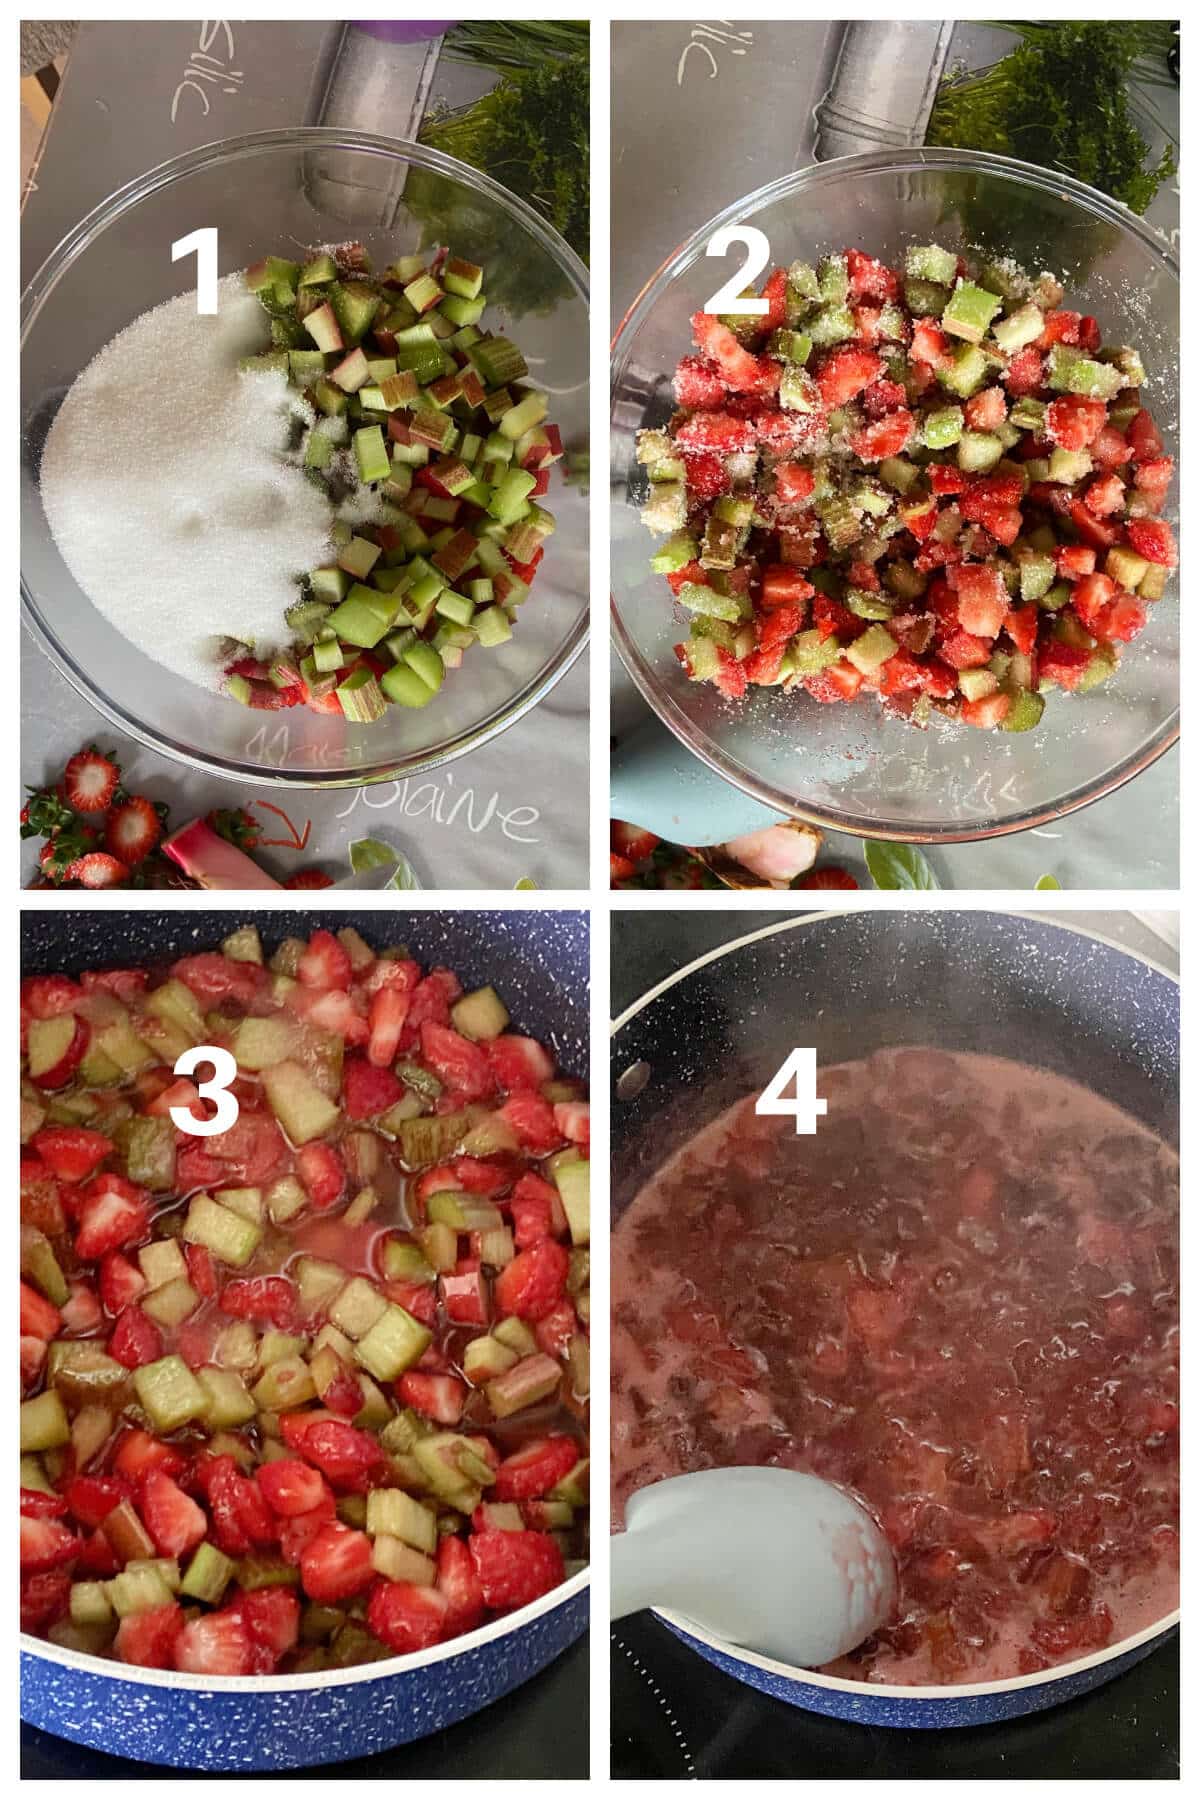 Collage of 4 photos to show how to make jam with strawberries and rhubarb.